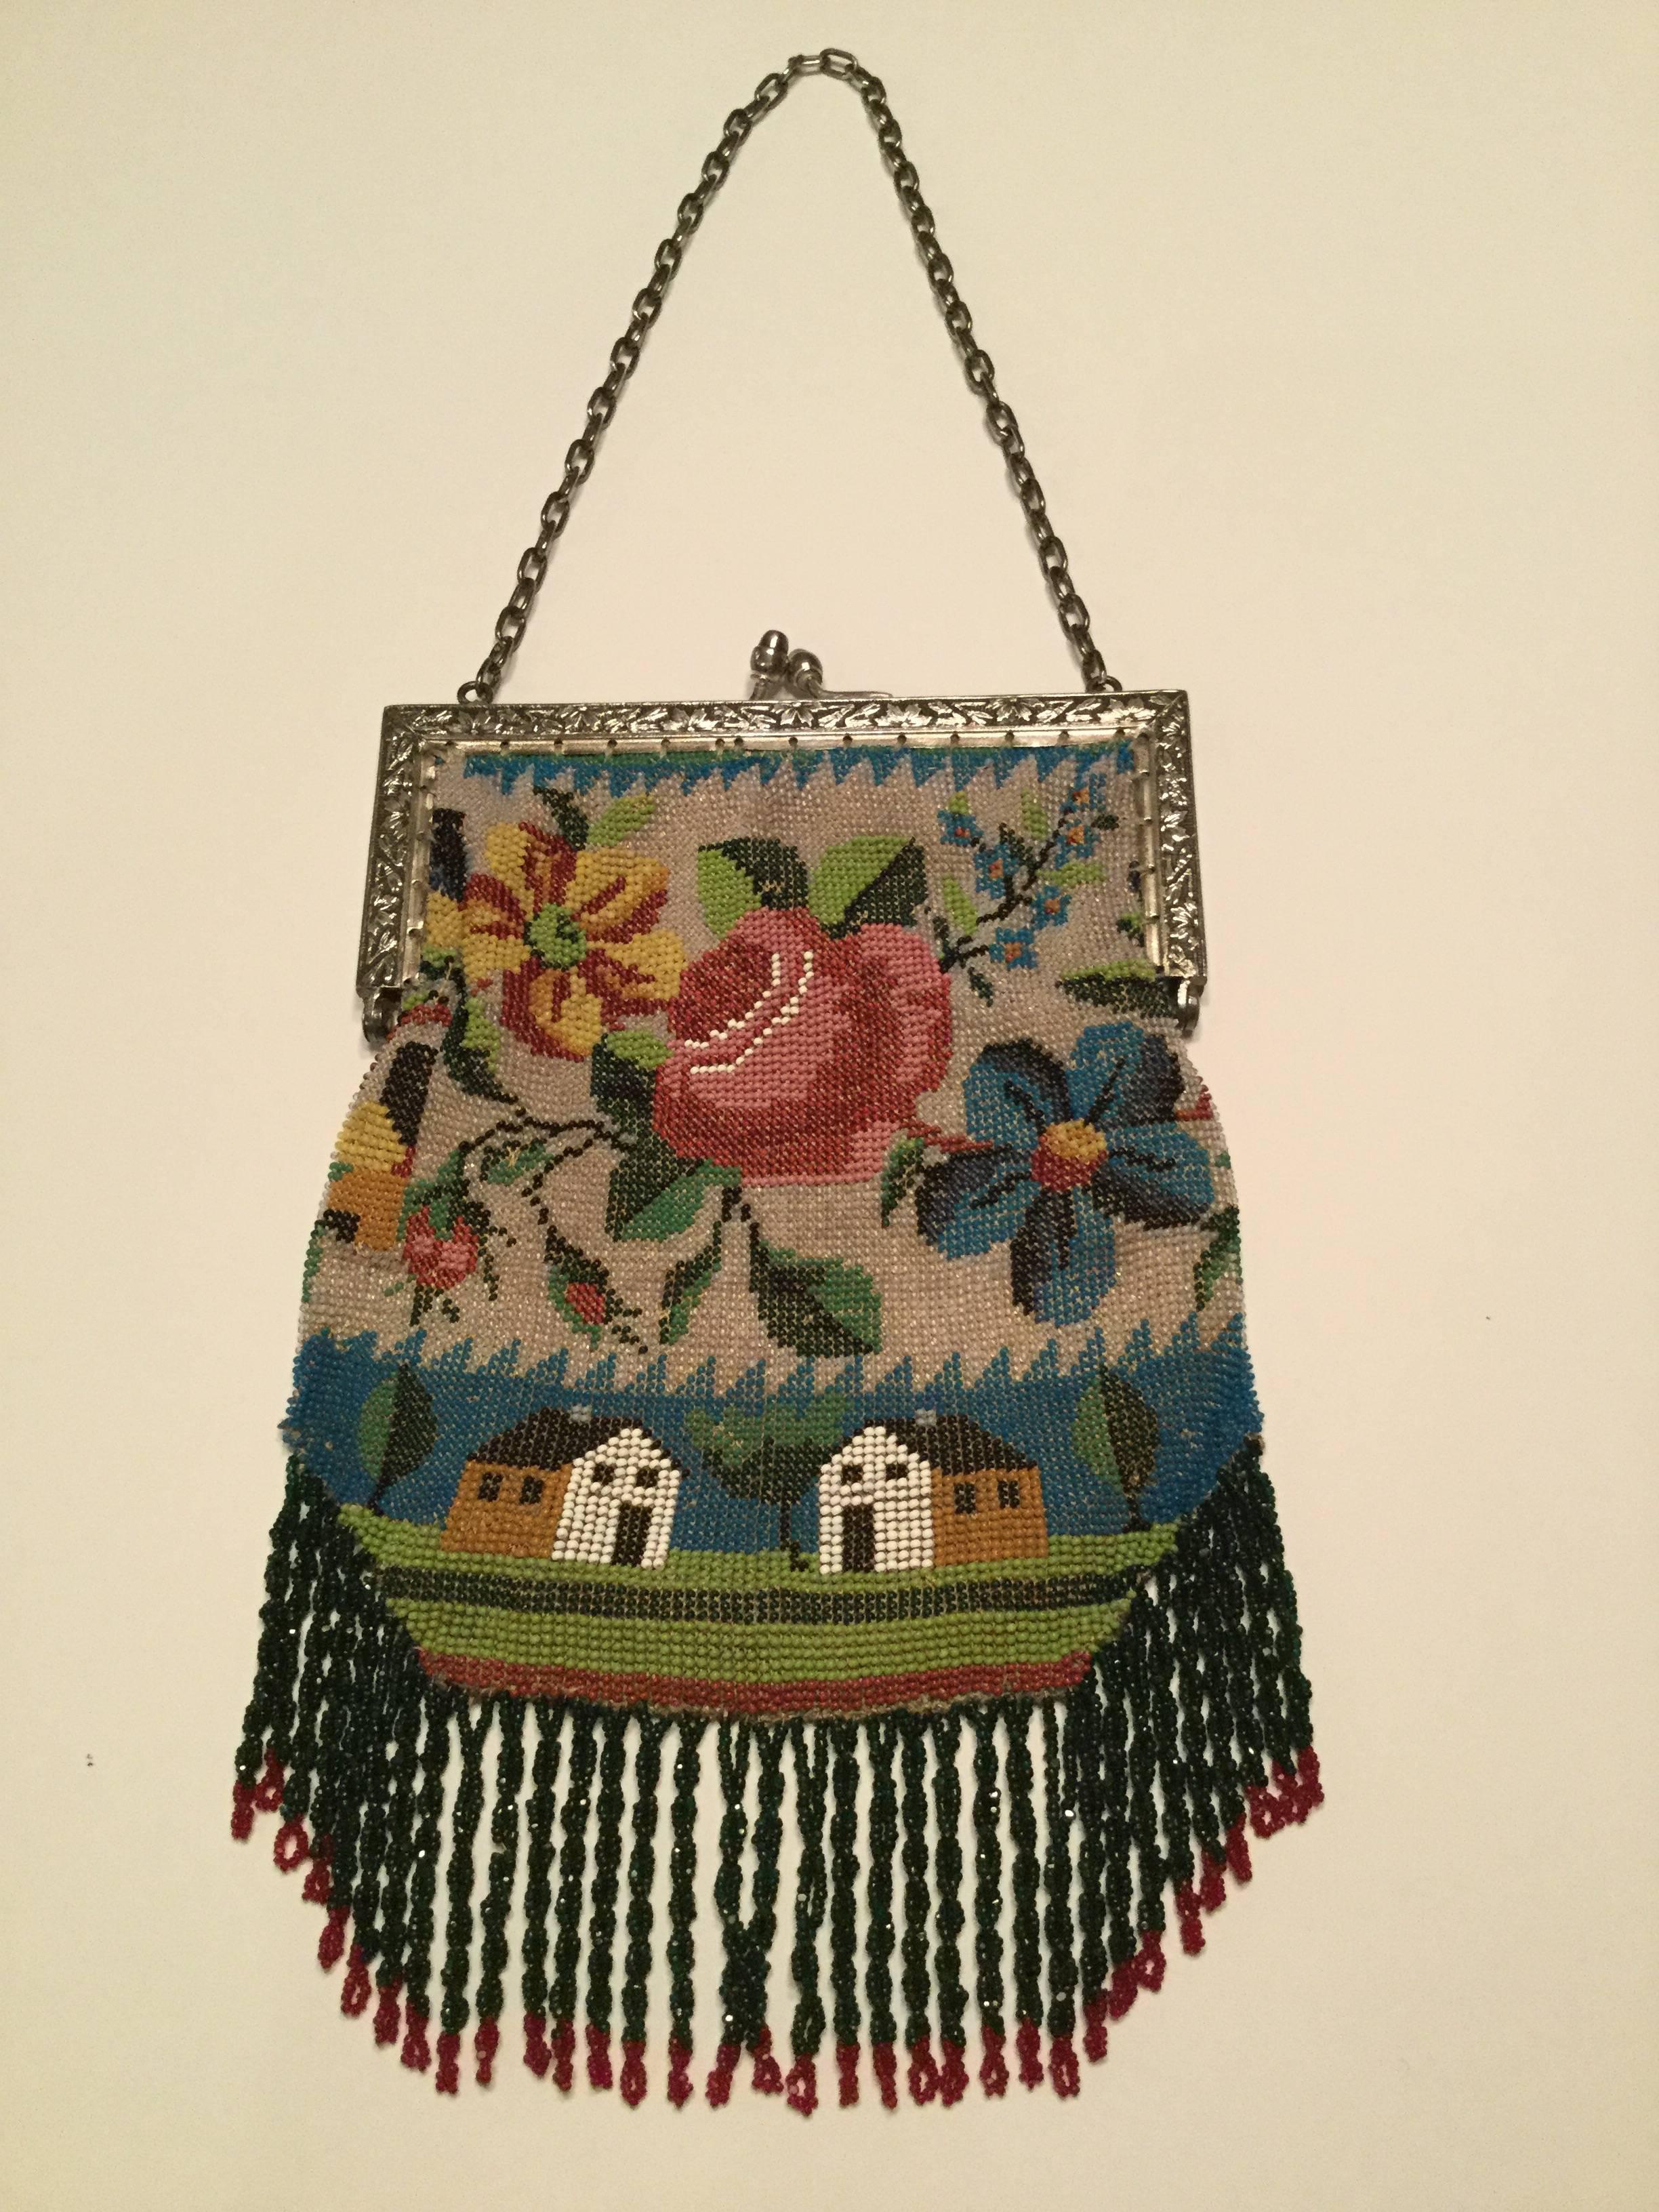 Victorian micro-beaded scenic fringed bag depicting two Shaker style
cottages in a stylized landscape. A profusion of cabbage roses and other florals grace the upper section. The beads here are just tiny and must have taken an incredible length of